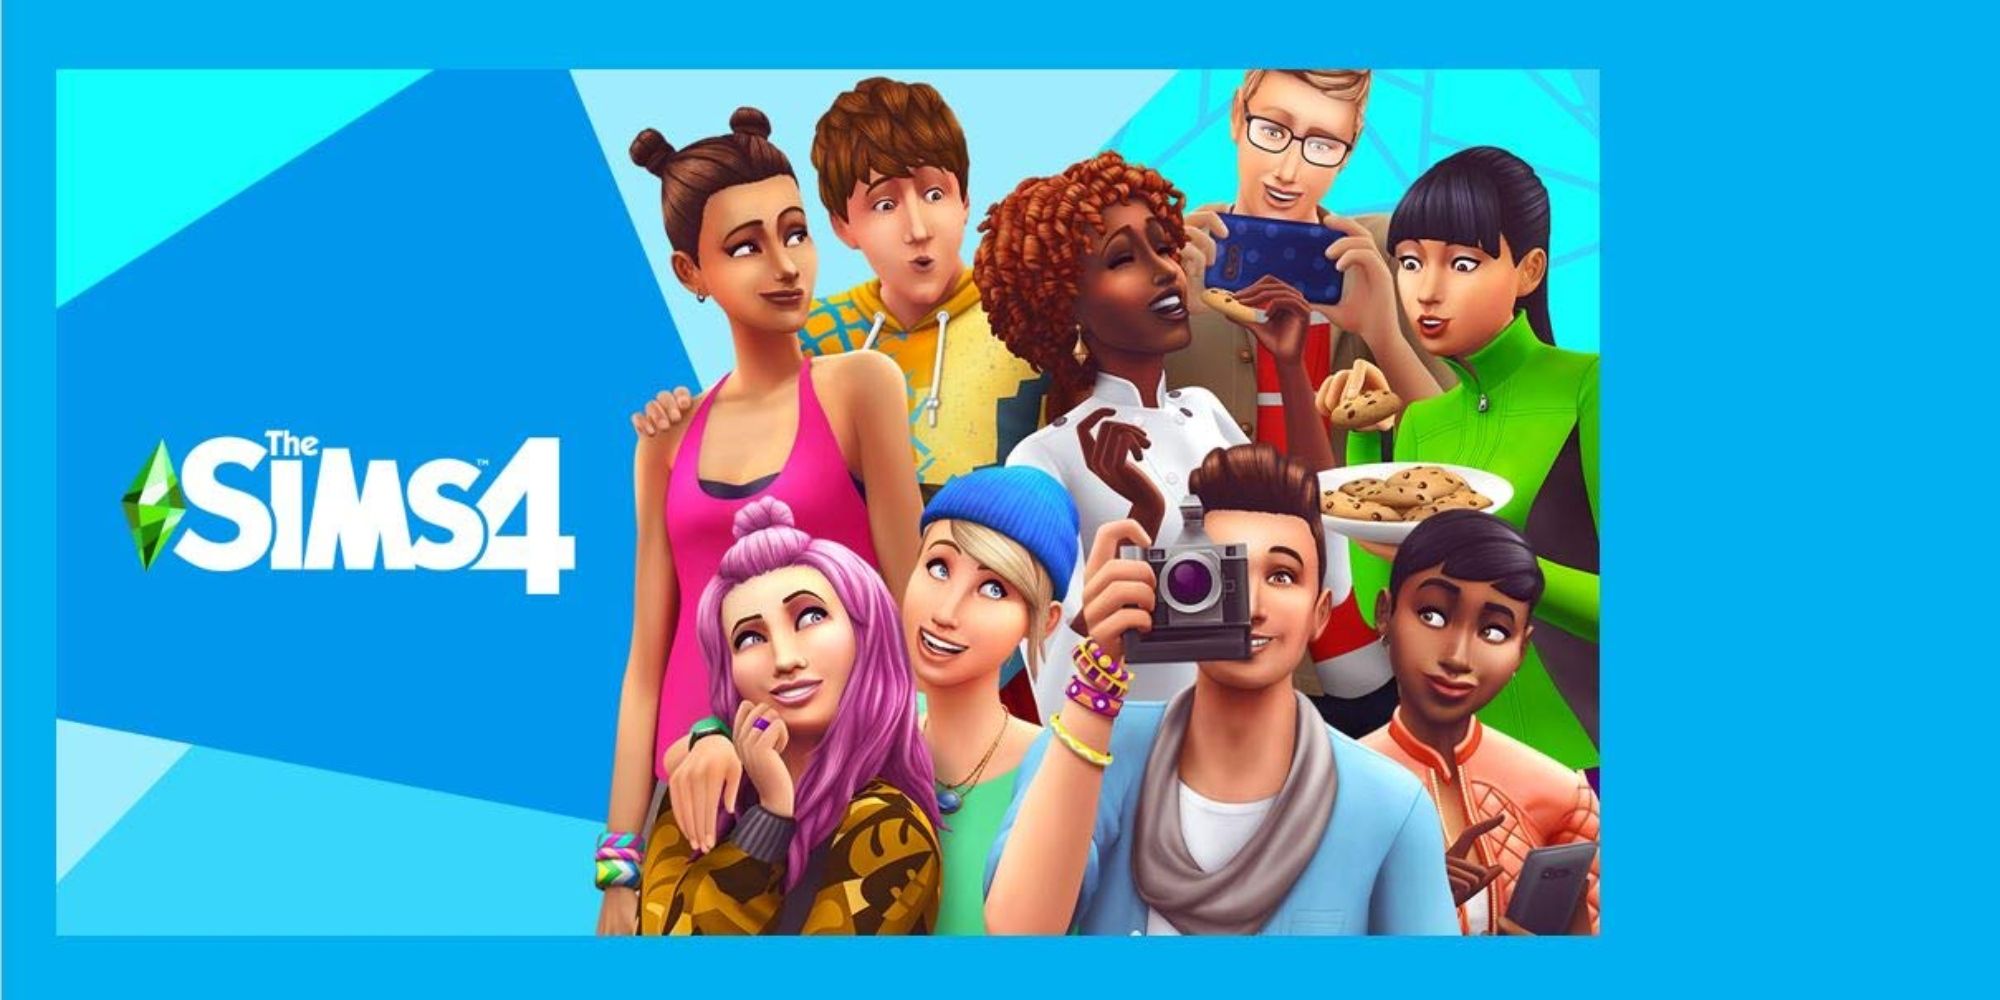 the sims 4 expansion packs